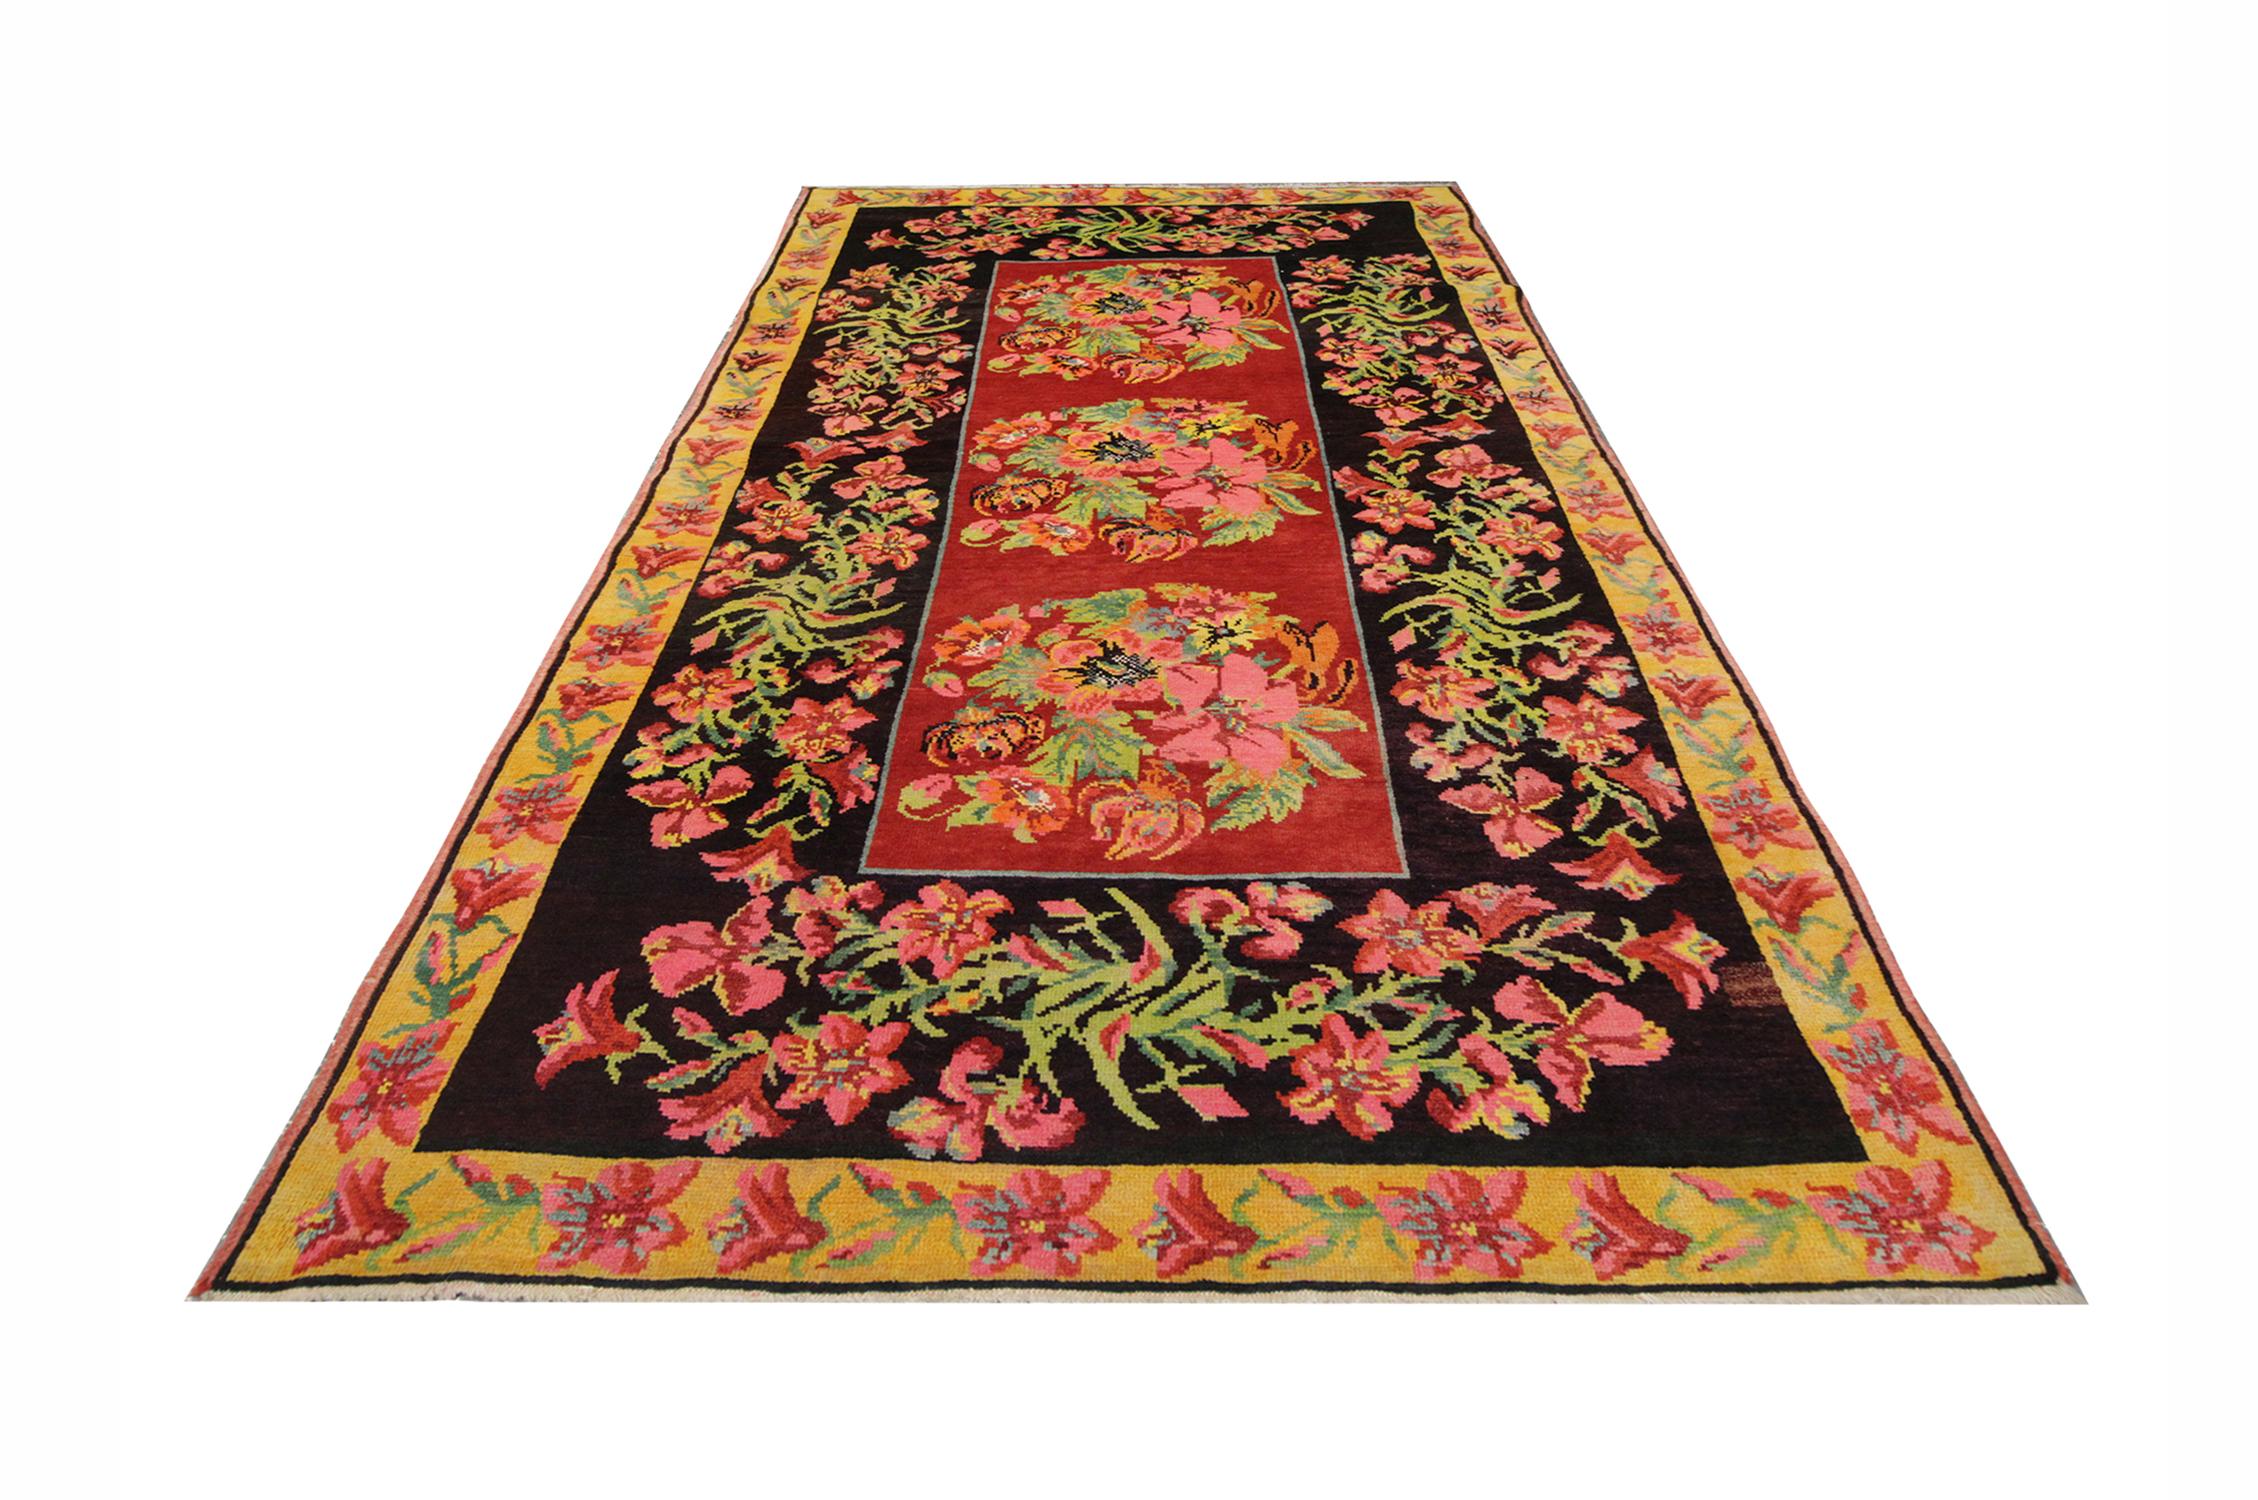 This colorful rug was handwoven and hand-dyed using traditional vegetable dye techniques in Karabagh. Using only the highest quality wool and cotton this flat-weave rug has blue, orange, grey, white, pink and red colors in a pattern across the rug.